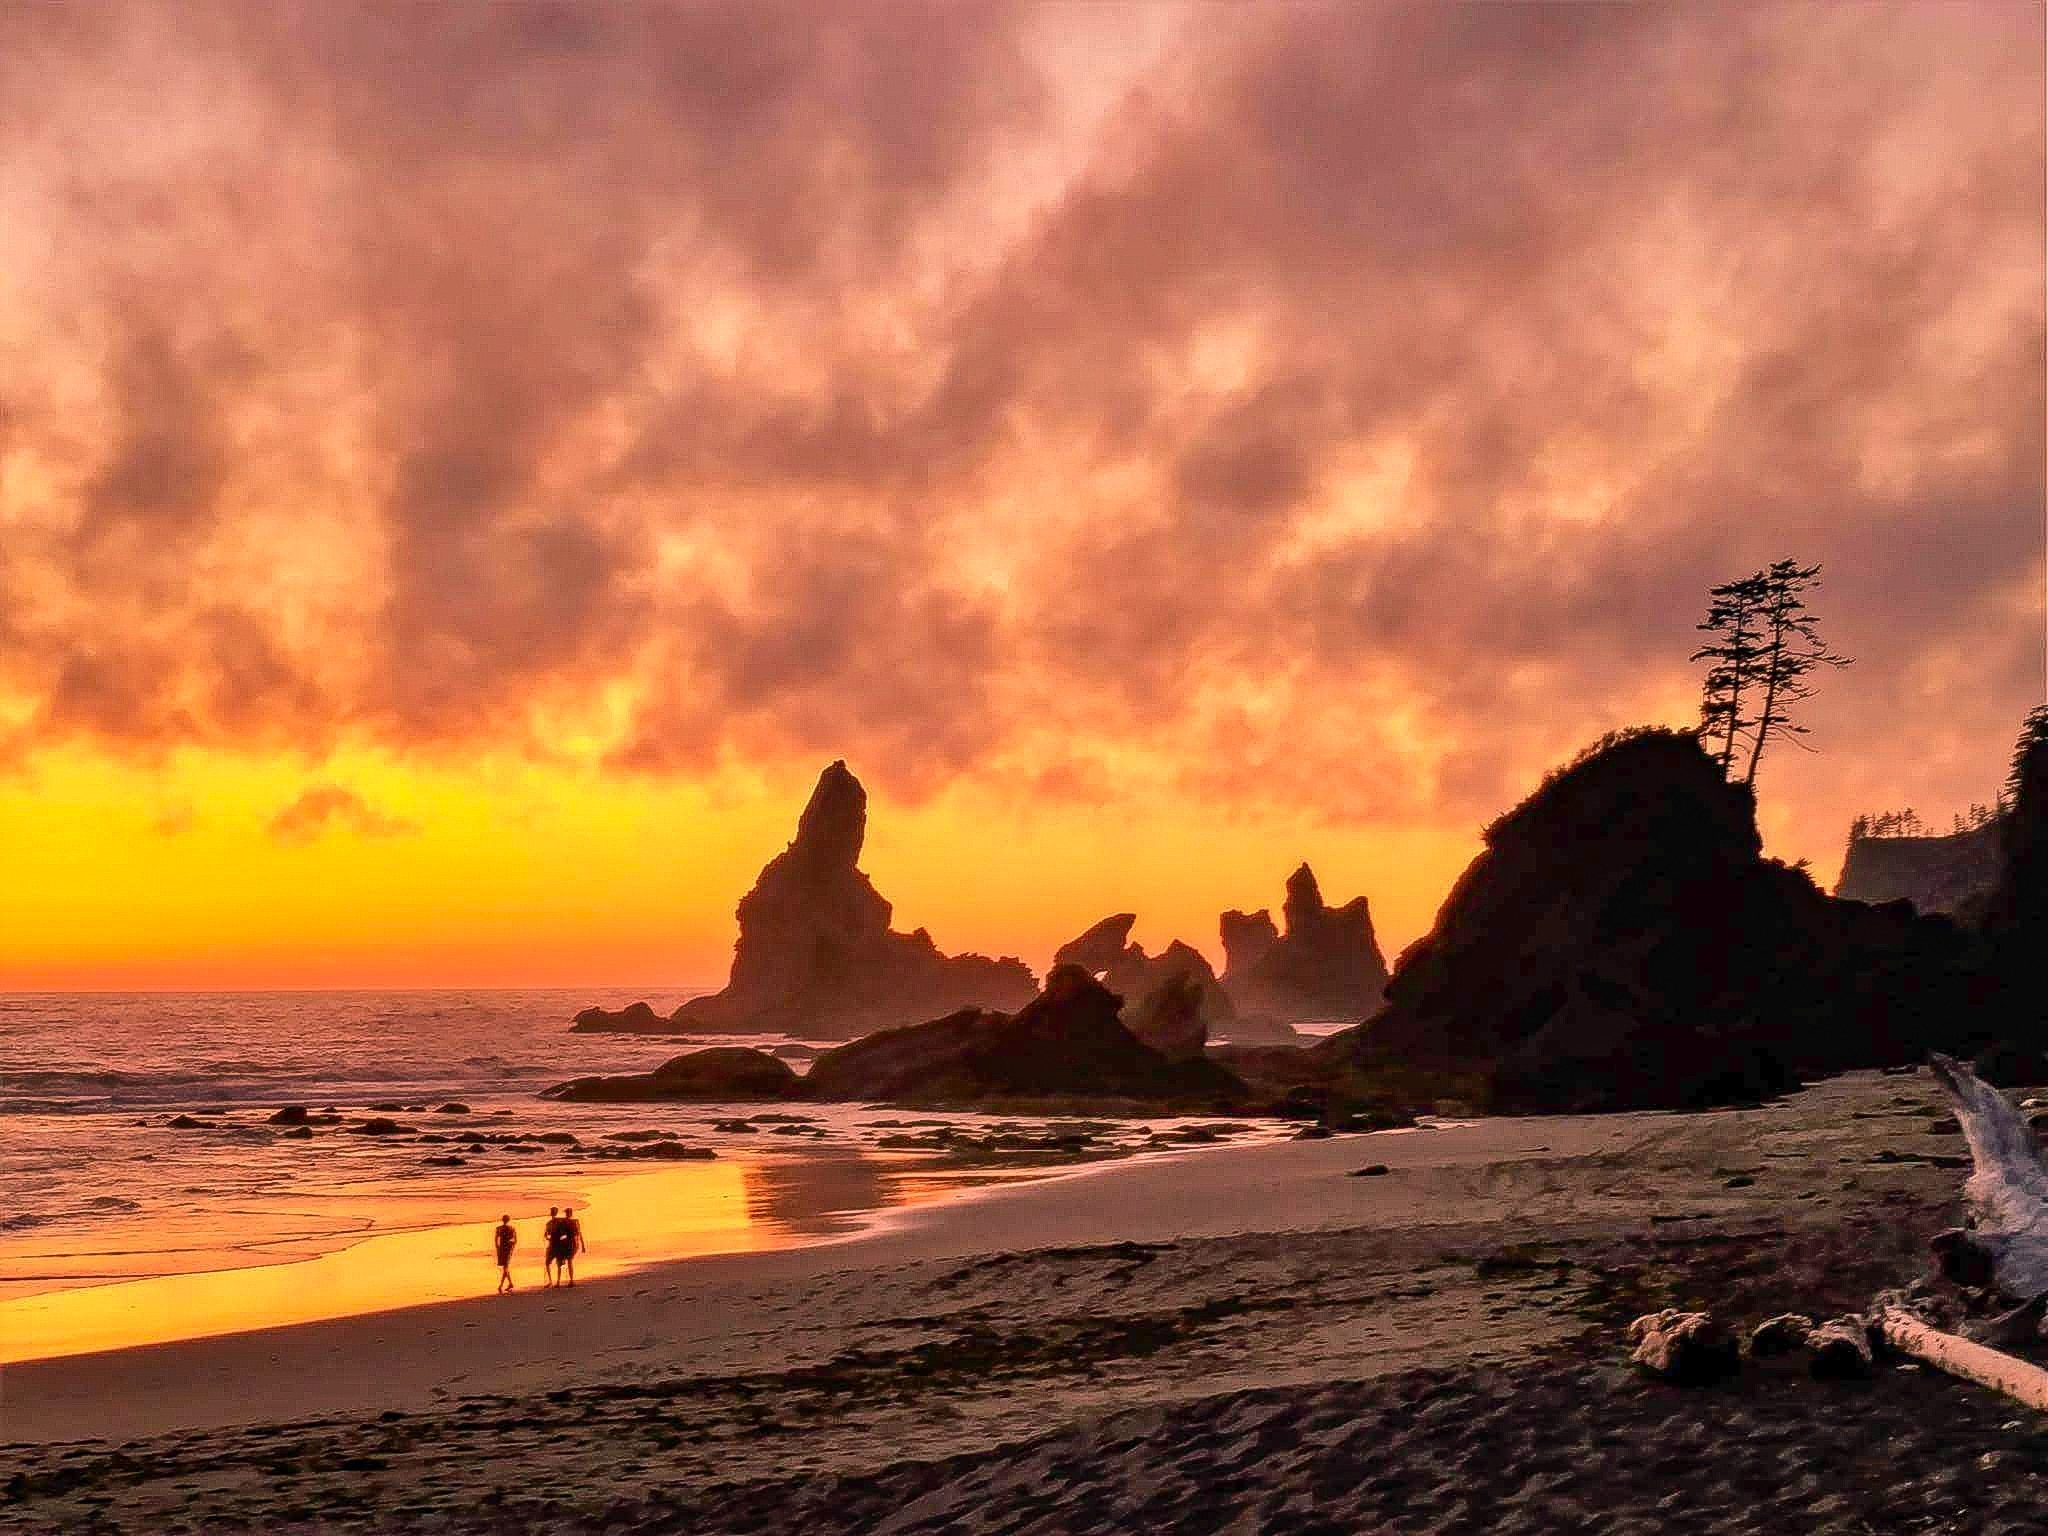 Do you like camping? How about camping on a beach? The views here are otherworldly with the sea stacks and various tide pools. Located in the green paradise that is the Olympic National Park, it is only a short 0.7 mile hike and you're there . Think ahead and bring some wood for a fire and smores. I promise this place is truly unique and spending a night listening to the waves crashing was one of the most surreal and relaxing experiences of my life. Just beware of the tides, as you do not want to get washed away. Also a wilderness camping permit is required and you can get one of those at the Olympic National Park Visitors Center in Port Angeles. So do your mind a favor, escape the daily grind and technology for the ultimate nature experience. Remember to pack out what you pack in and leave no trace! Enjoy!

#culture